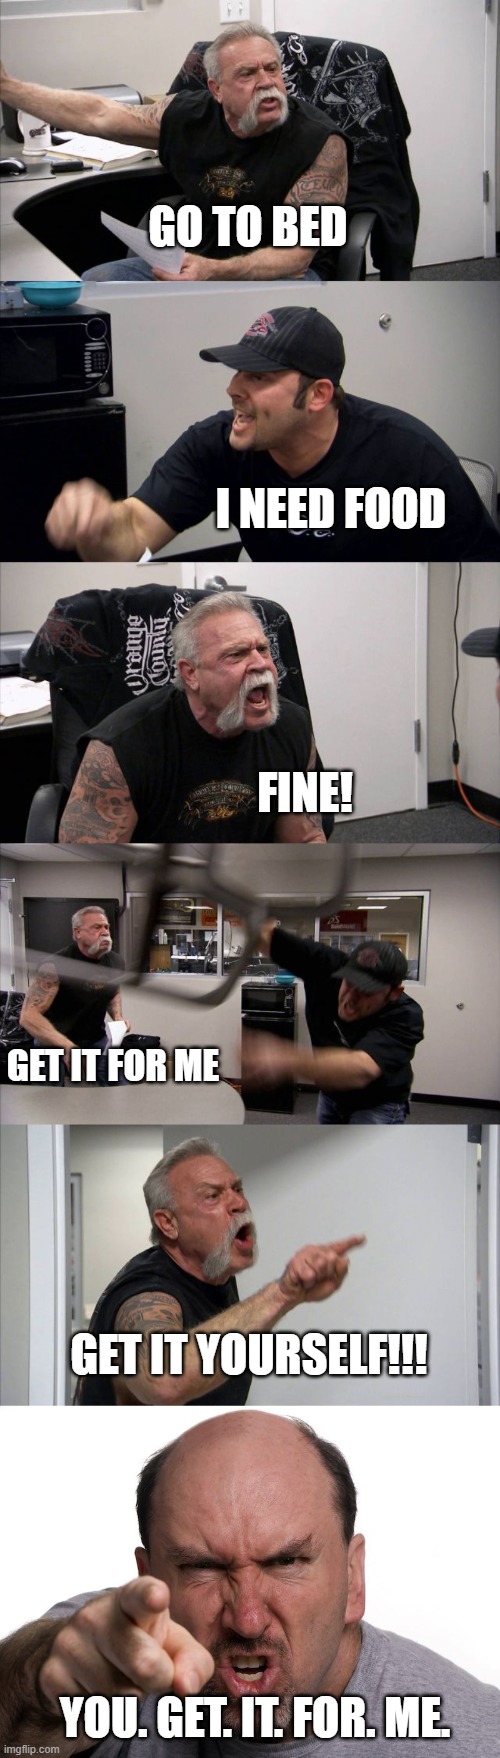 I need food | GO TO BED; I NEED FOOD; FINE! GET IT FOR ME; GET IT YOURSELF!!! YOU. GET. IT. FOR. ME. | image tagged in memes,american chopper argument | made w/ Imgflip meme maker